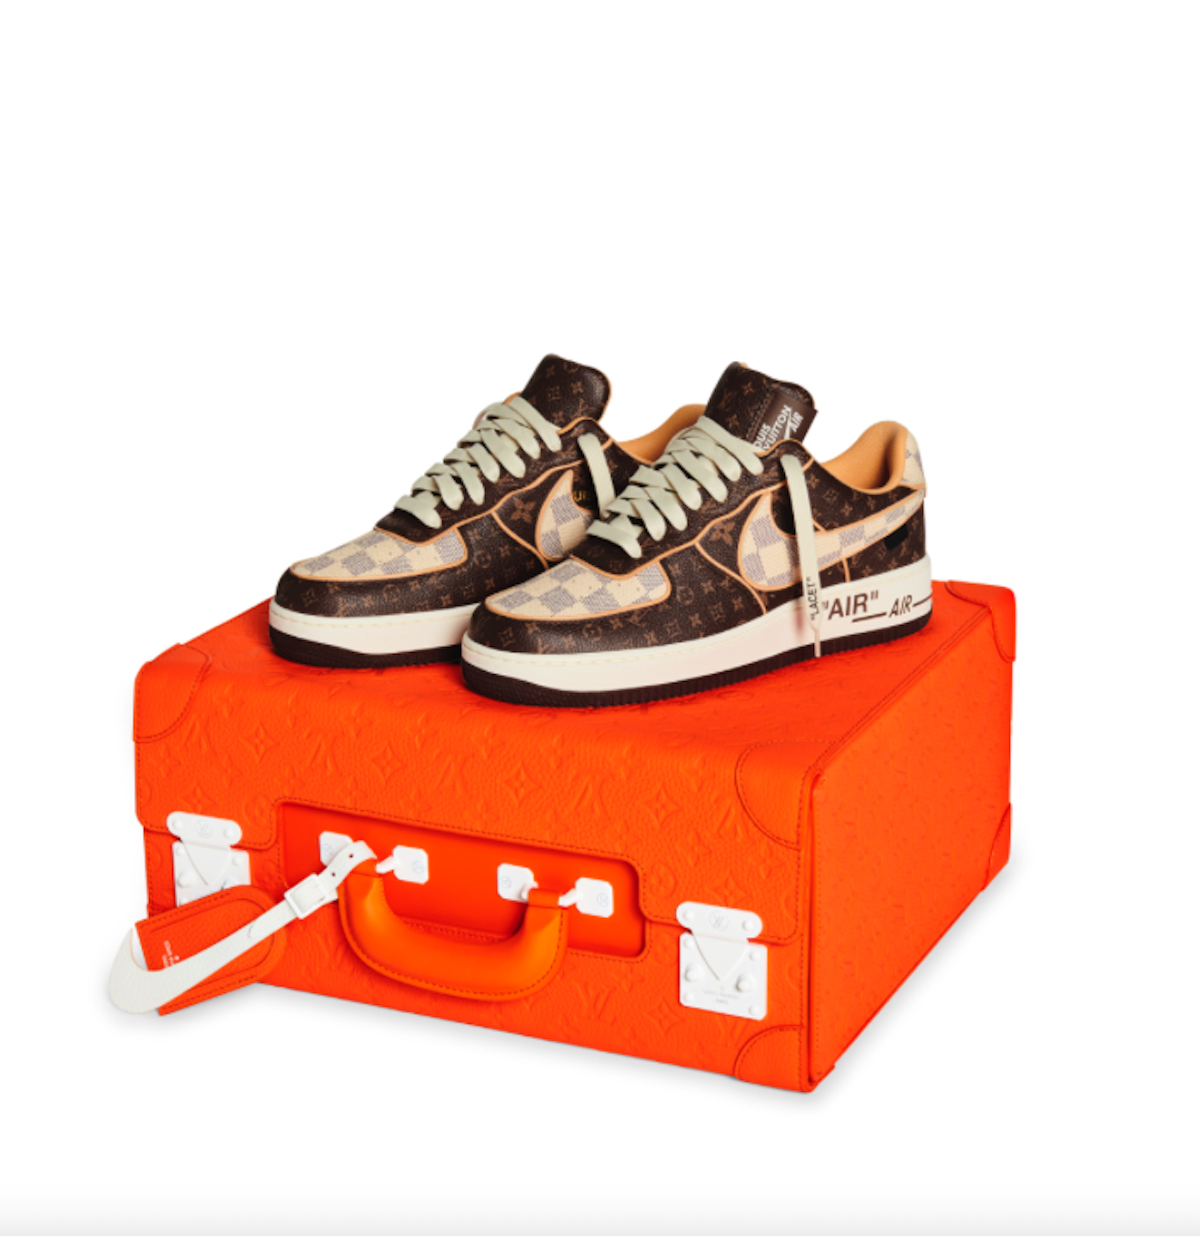 Louis Vuitton x Nike Air Force 1 Auctions at Sotheby’s